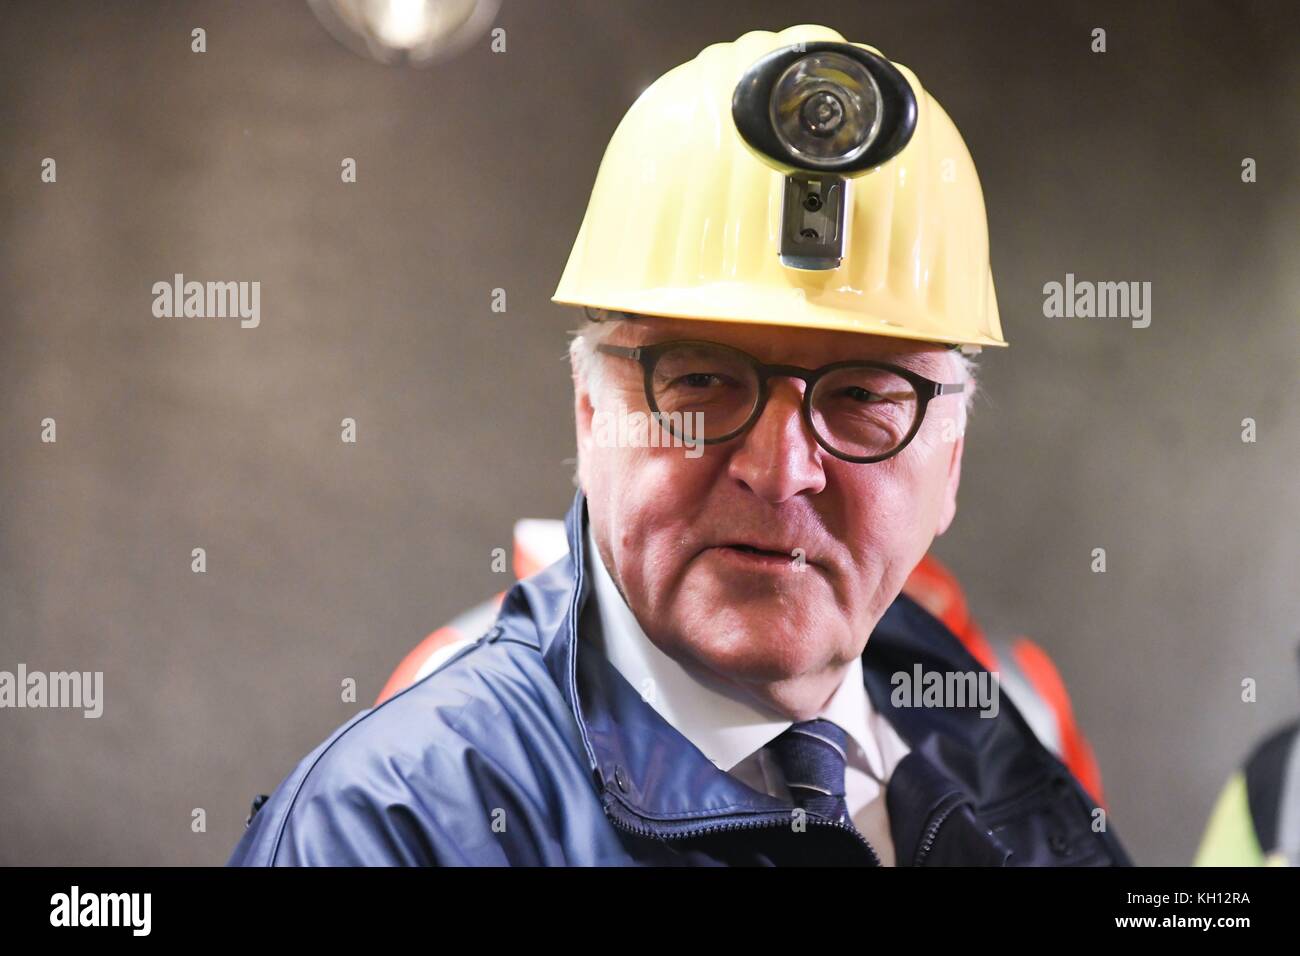 Oberwiesenthal, Germany. 13th Nov, 2017. German President Frank-Walter Steinmeier visiting the Niederschlag pit in Oberwiesenthal, Germany, 13 November 2017. President Steinmeier is with his wife on a two-day visit to Saxony. Credit: Sebastian Kahnert/dpa-Zentralbild/dpa/Alamy Live News Stock Photo